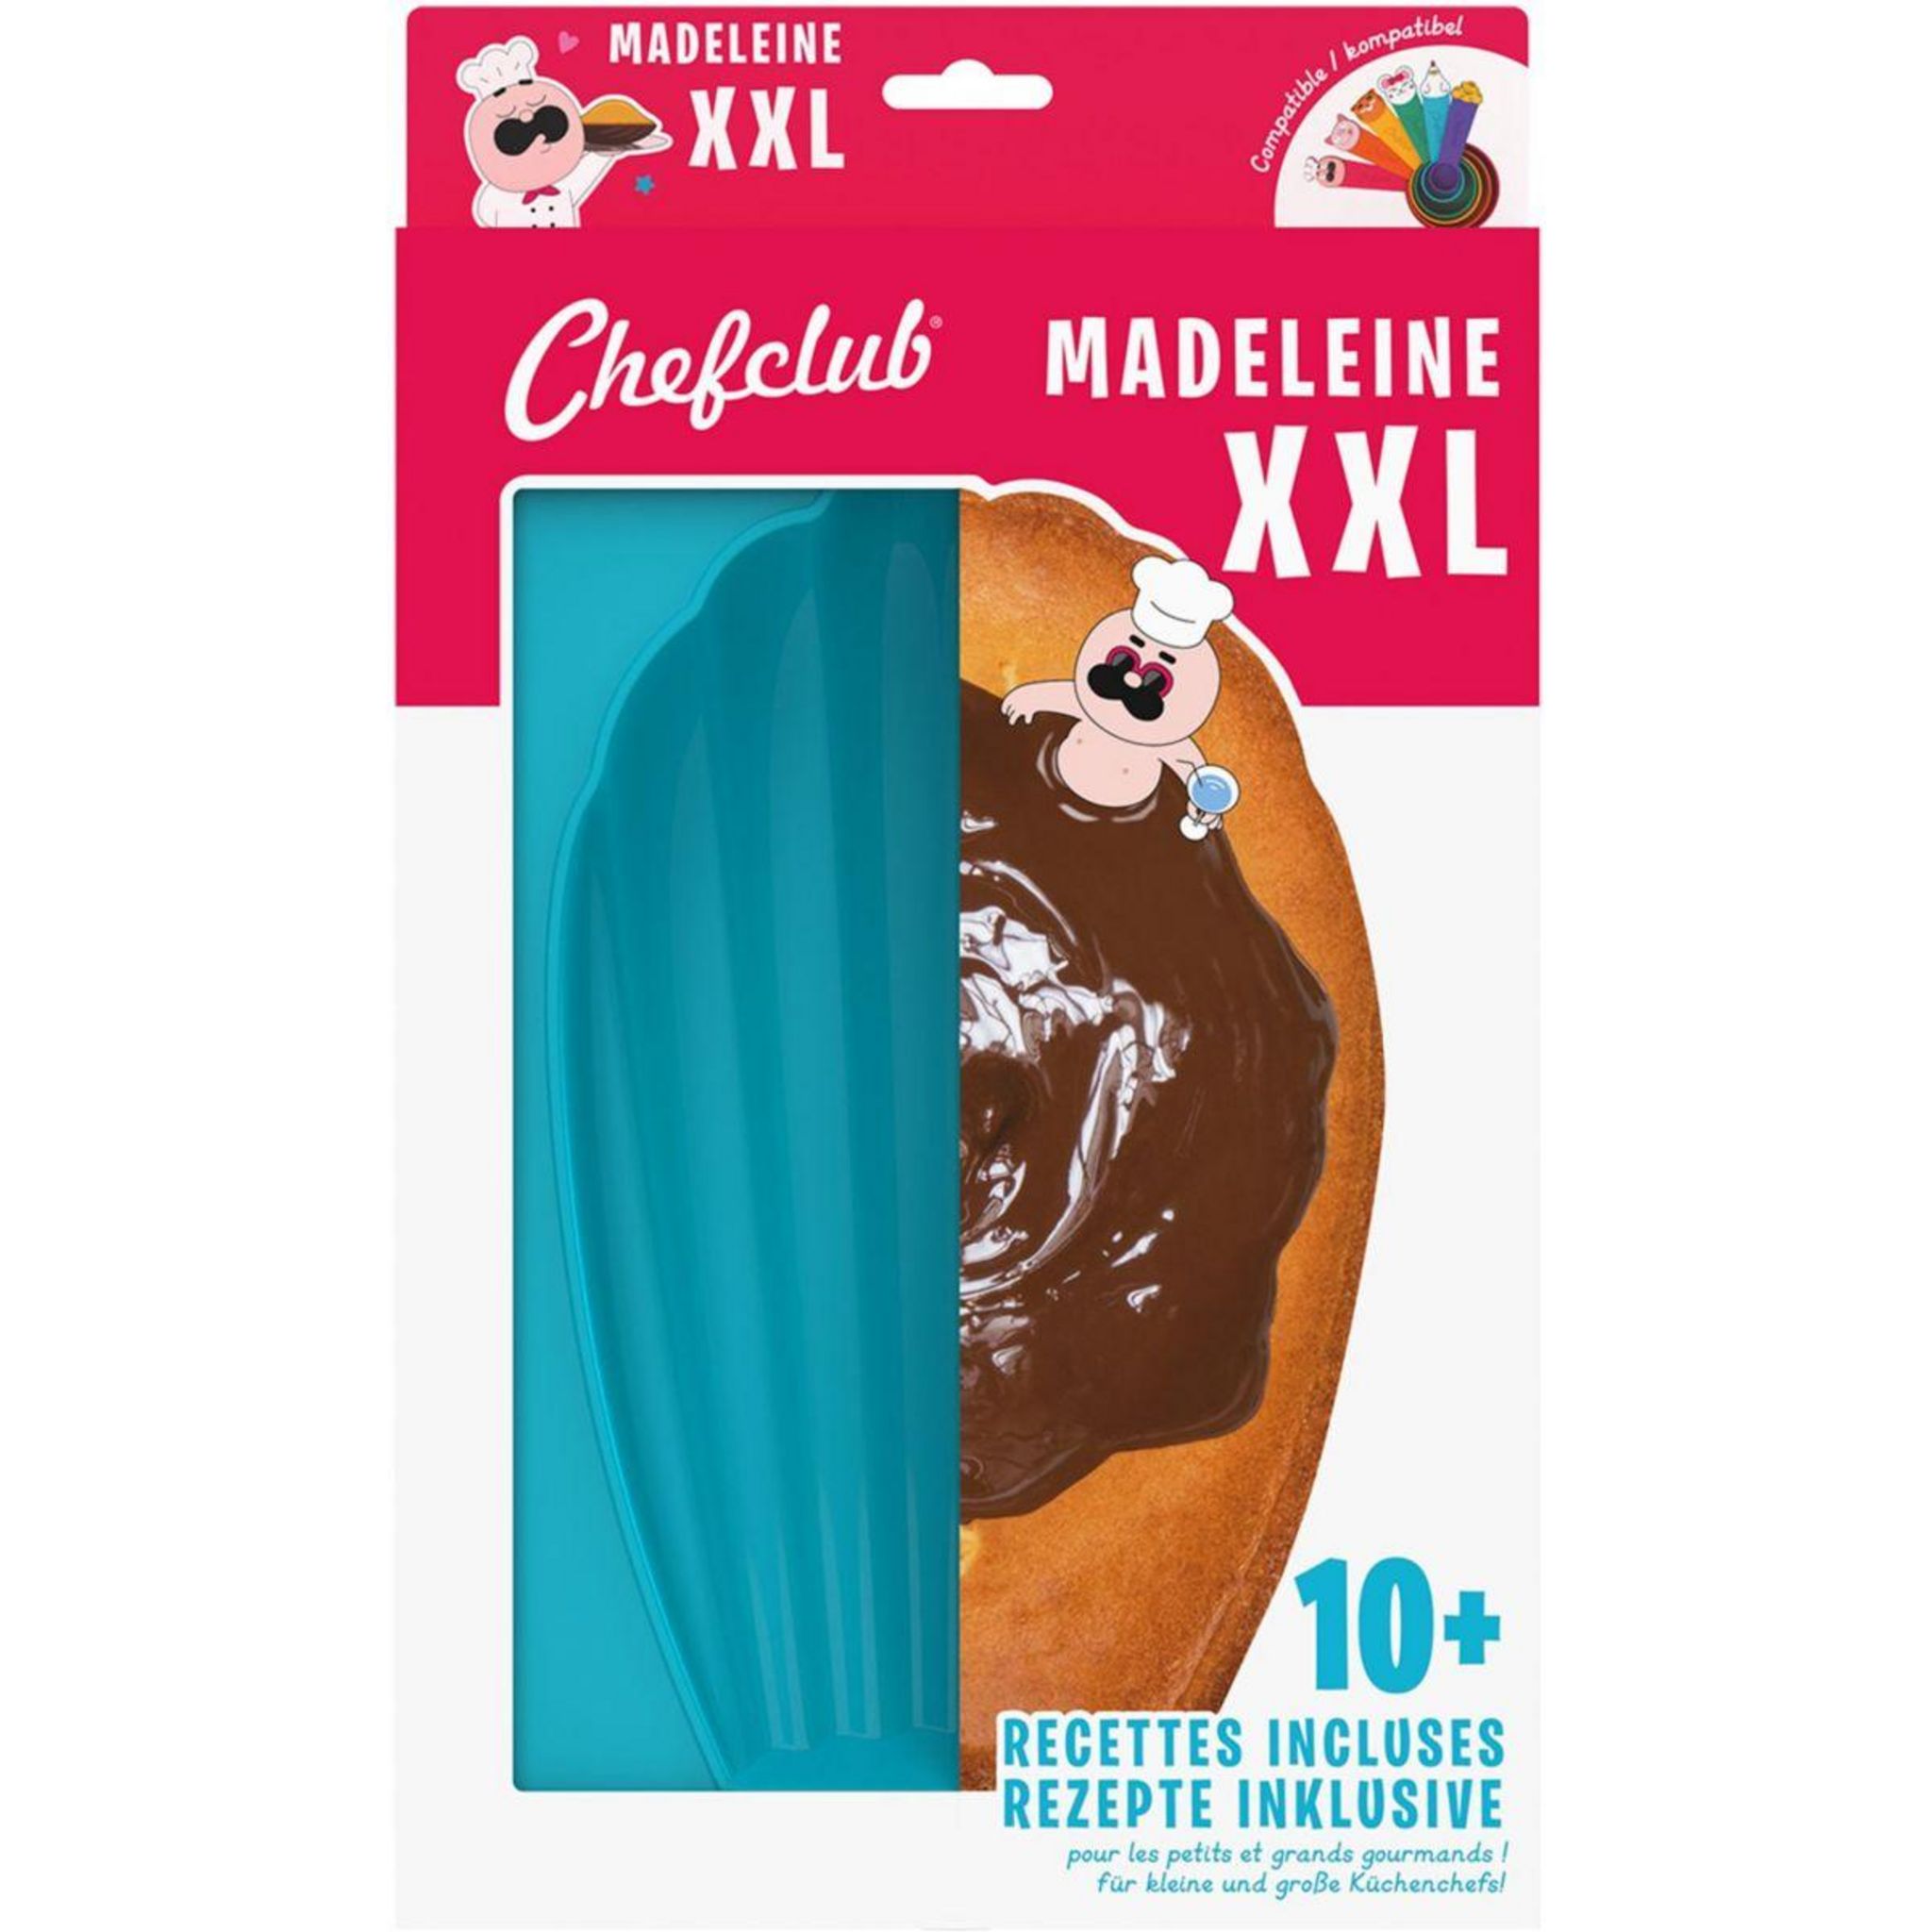 Moule Madeleine - Acheter Moule Silicone Mini Madeleines - Scrapcooking